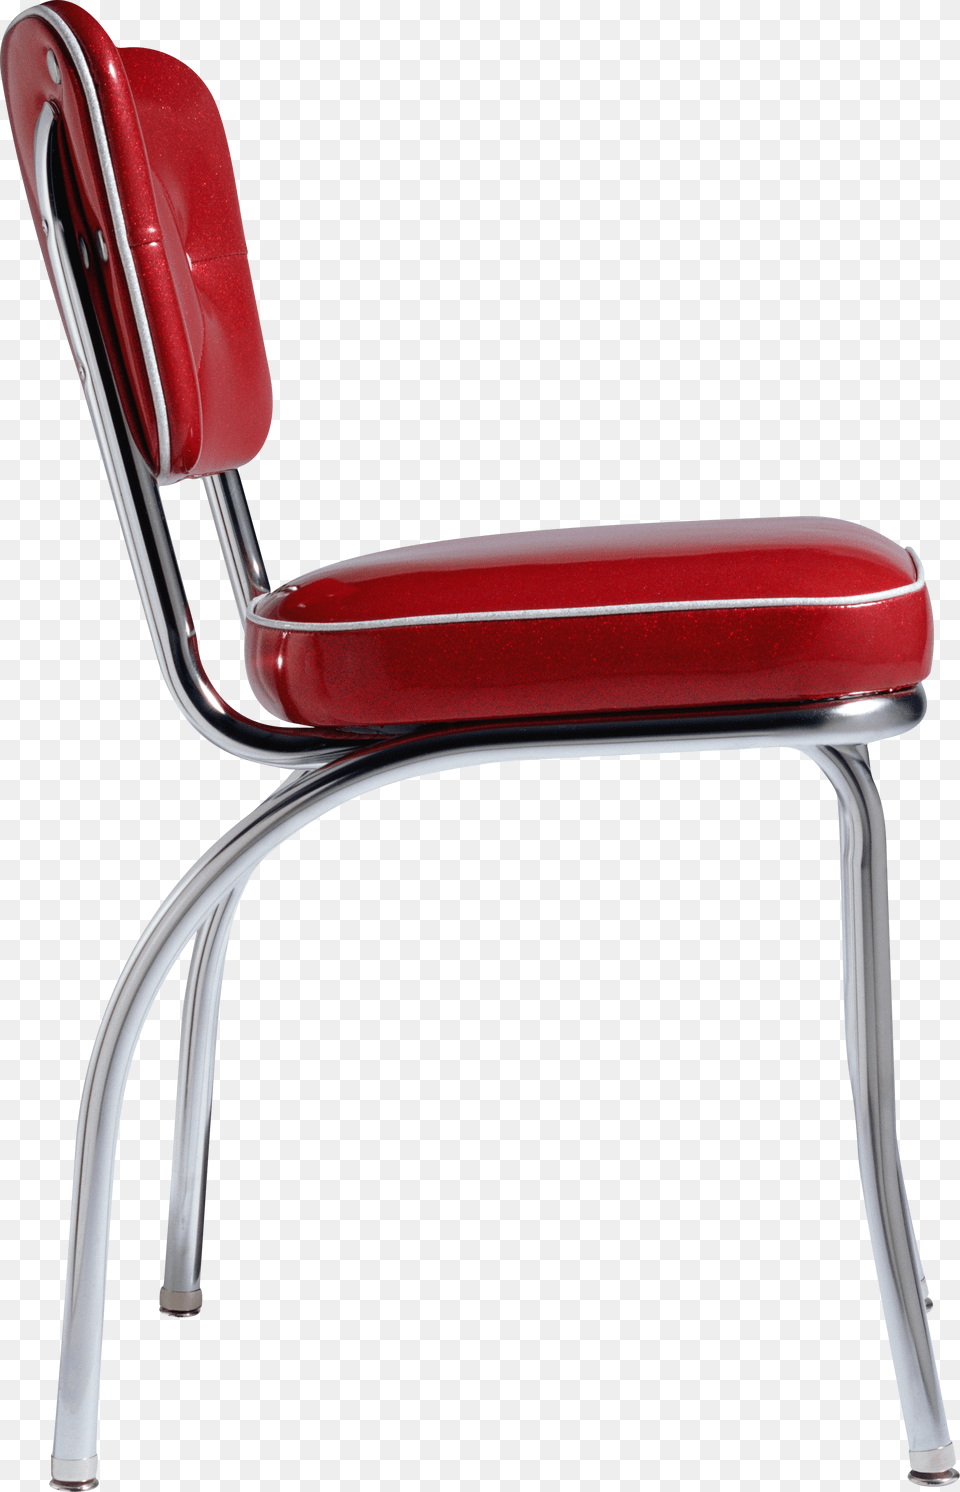 Chair, Furniture, Appliance, Blow Dryer, Device Png Image